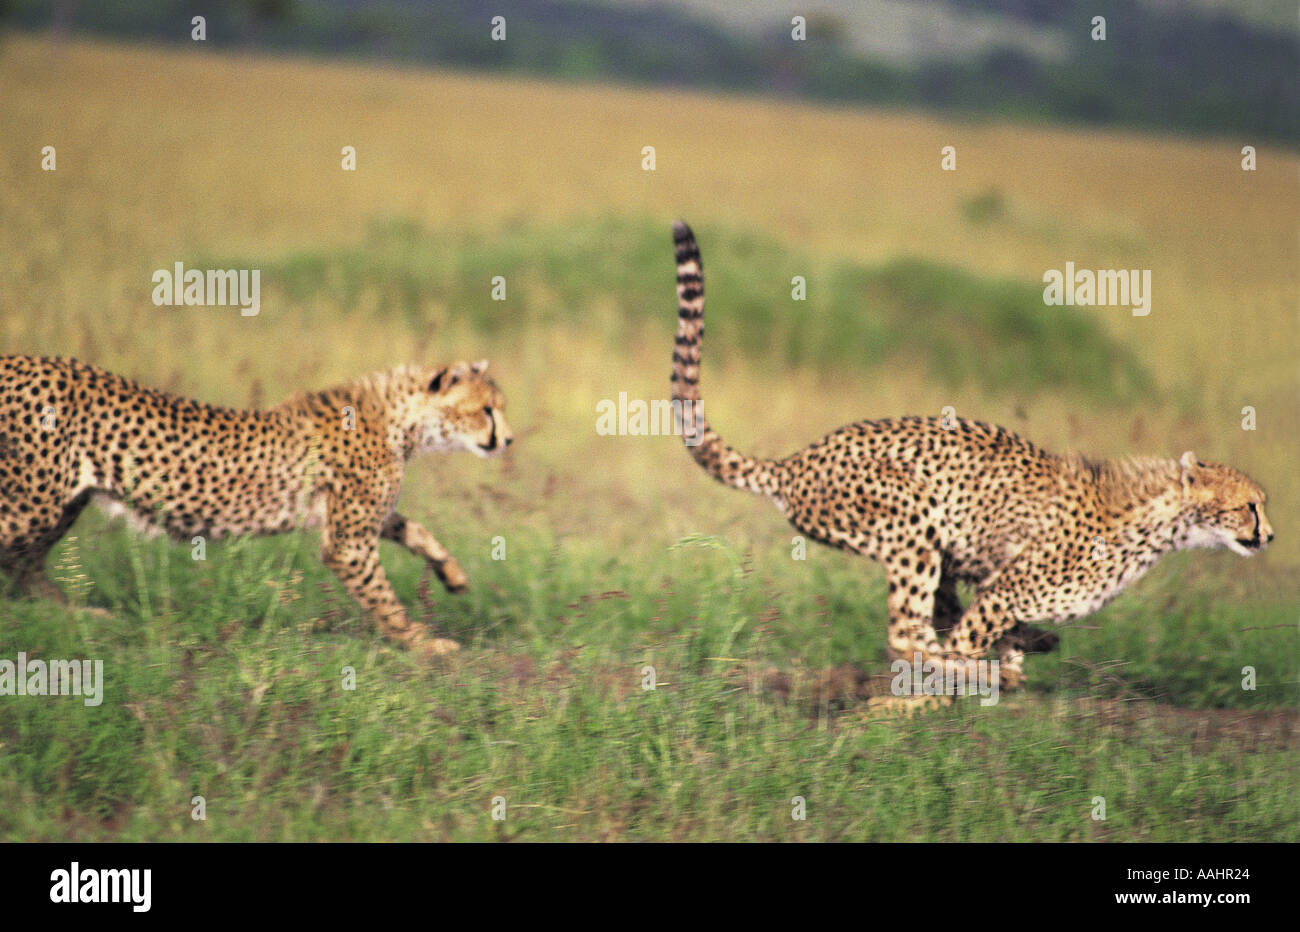 Almost fully grown cheetah cubs chasing each other Masai Mara National Reserve Kenya East Africa Stock Photo